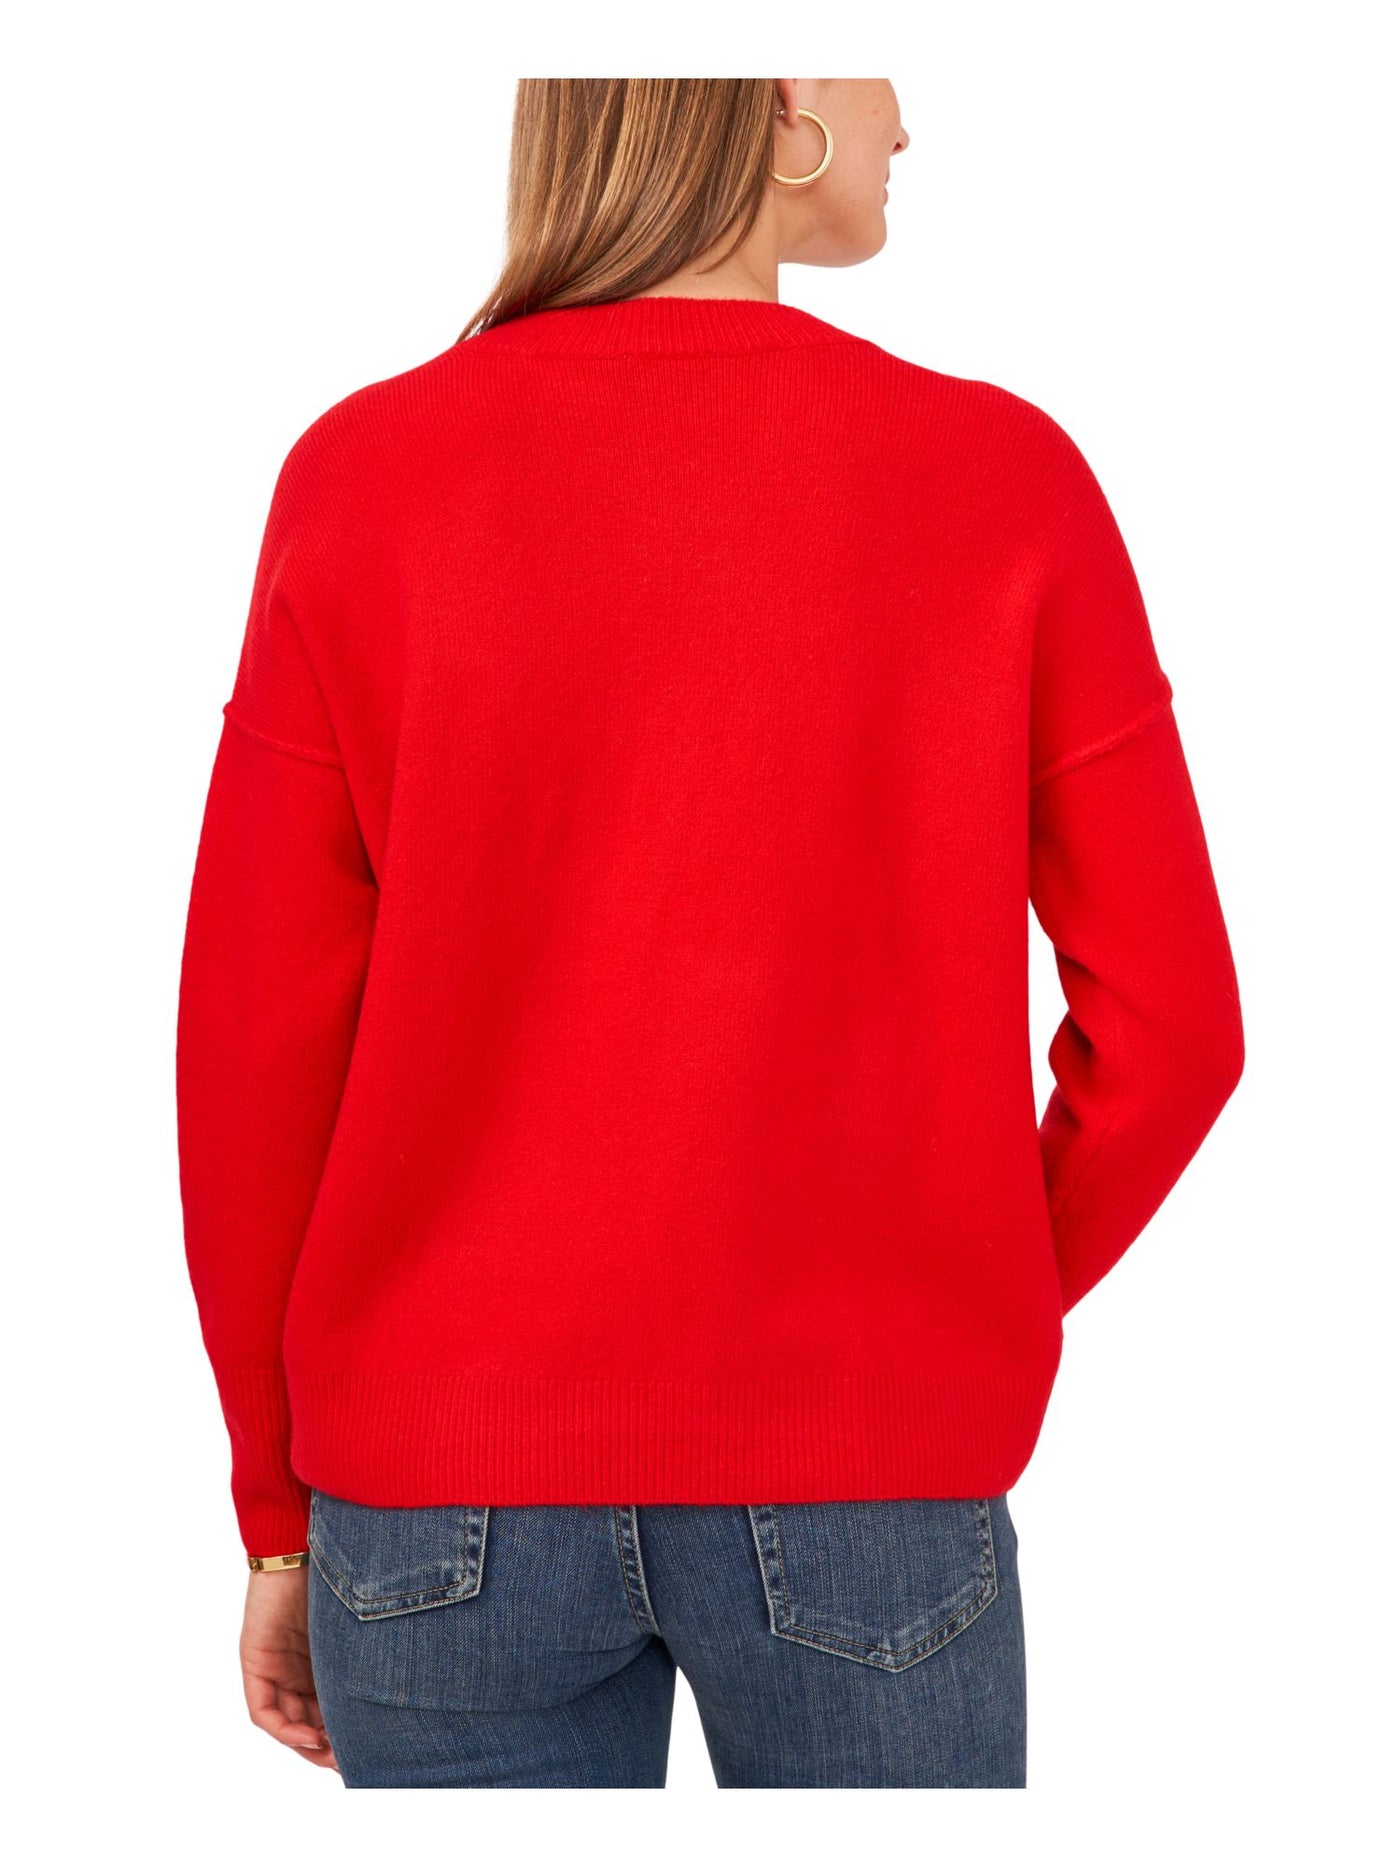 VINCE CAMUTO Womens Red Ribbed Printed Long Sleeve Crew Neck Sweater L